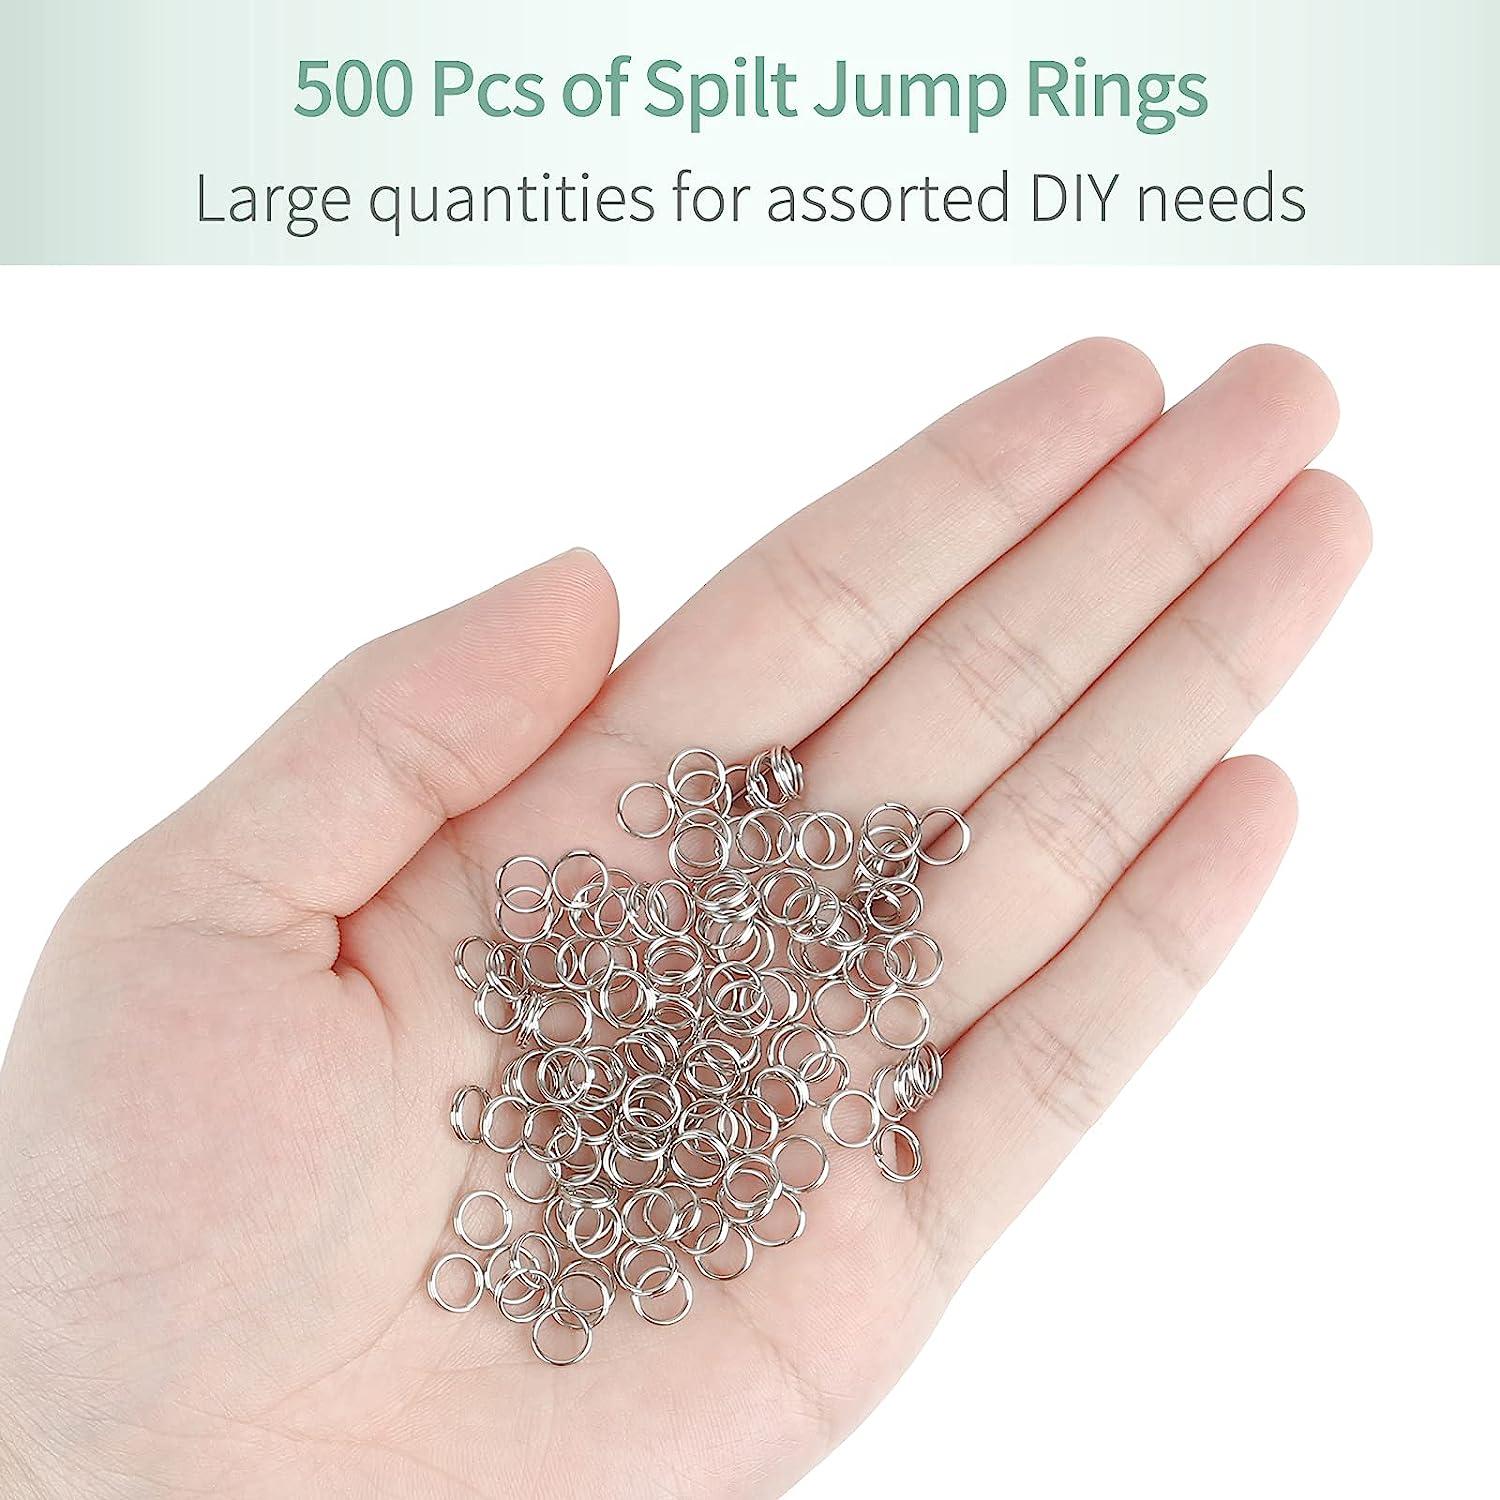  1000 Pcs 6mm Open Jump Rings Silver Plated Jump Rings